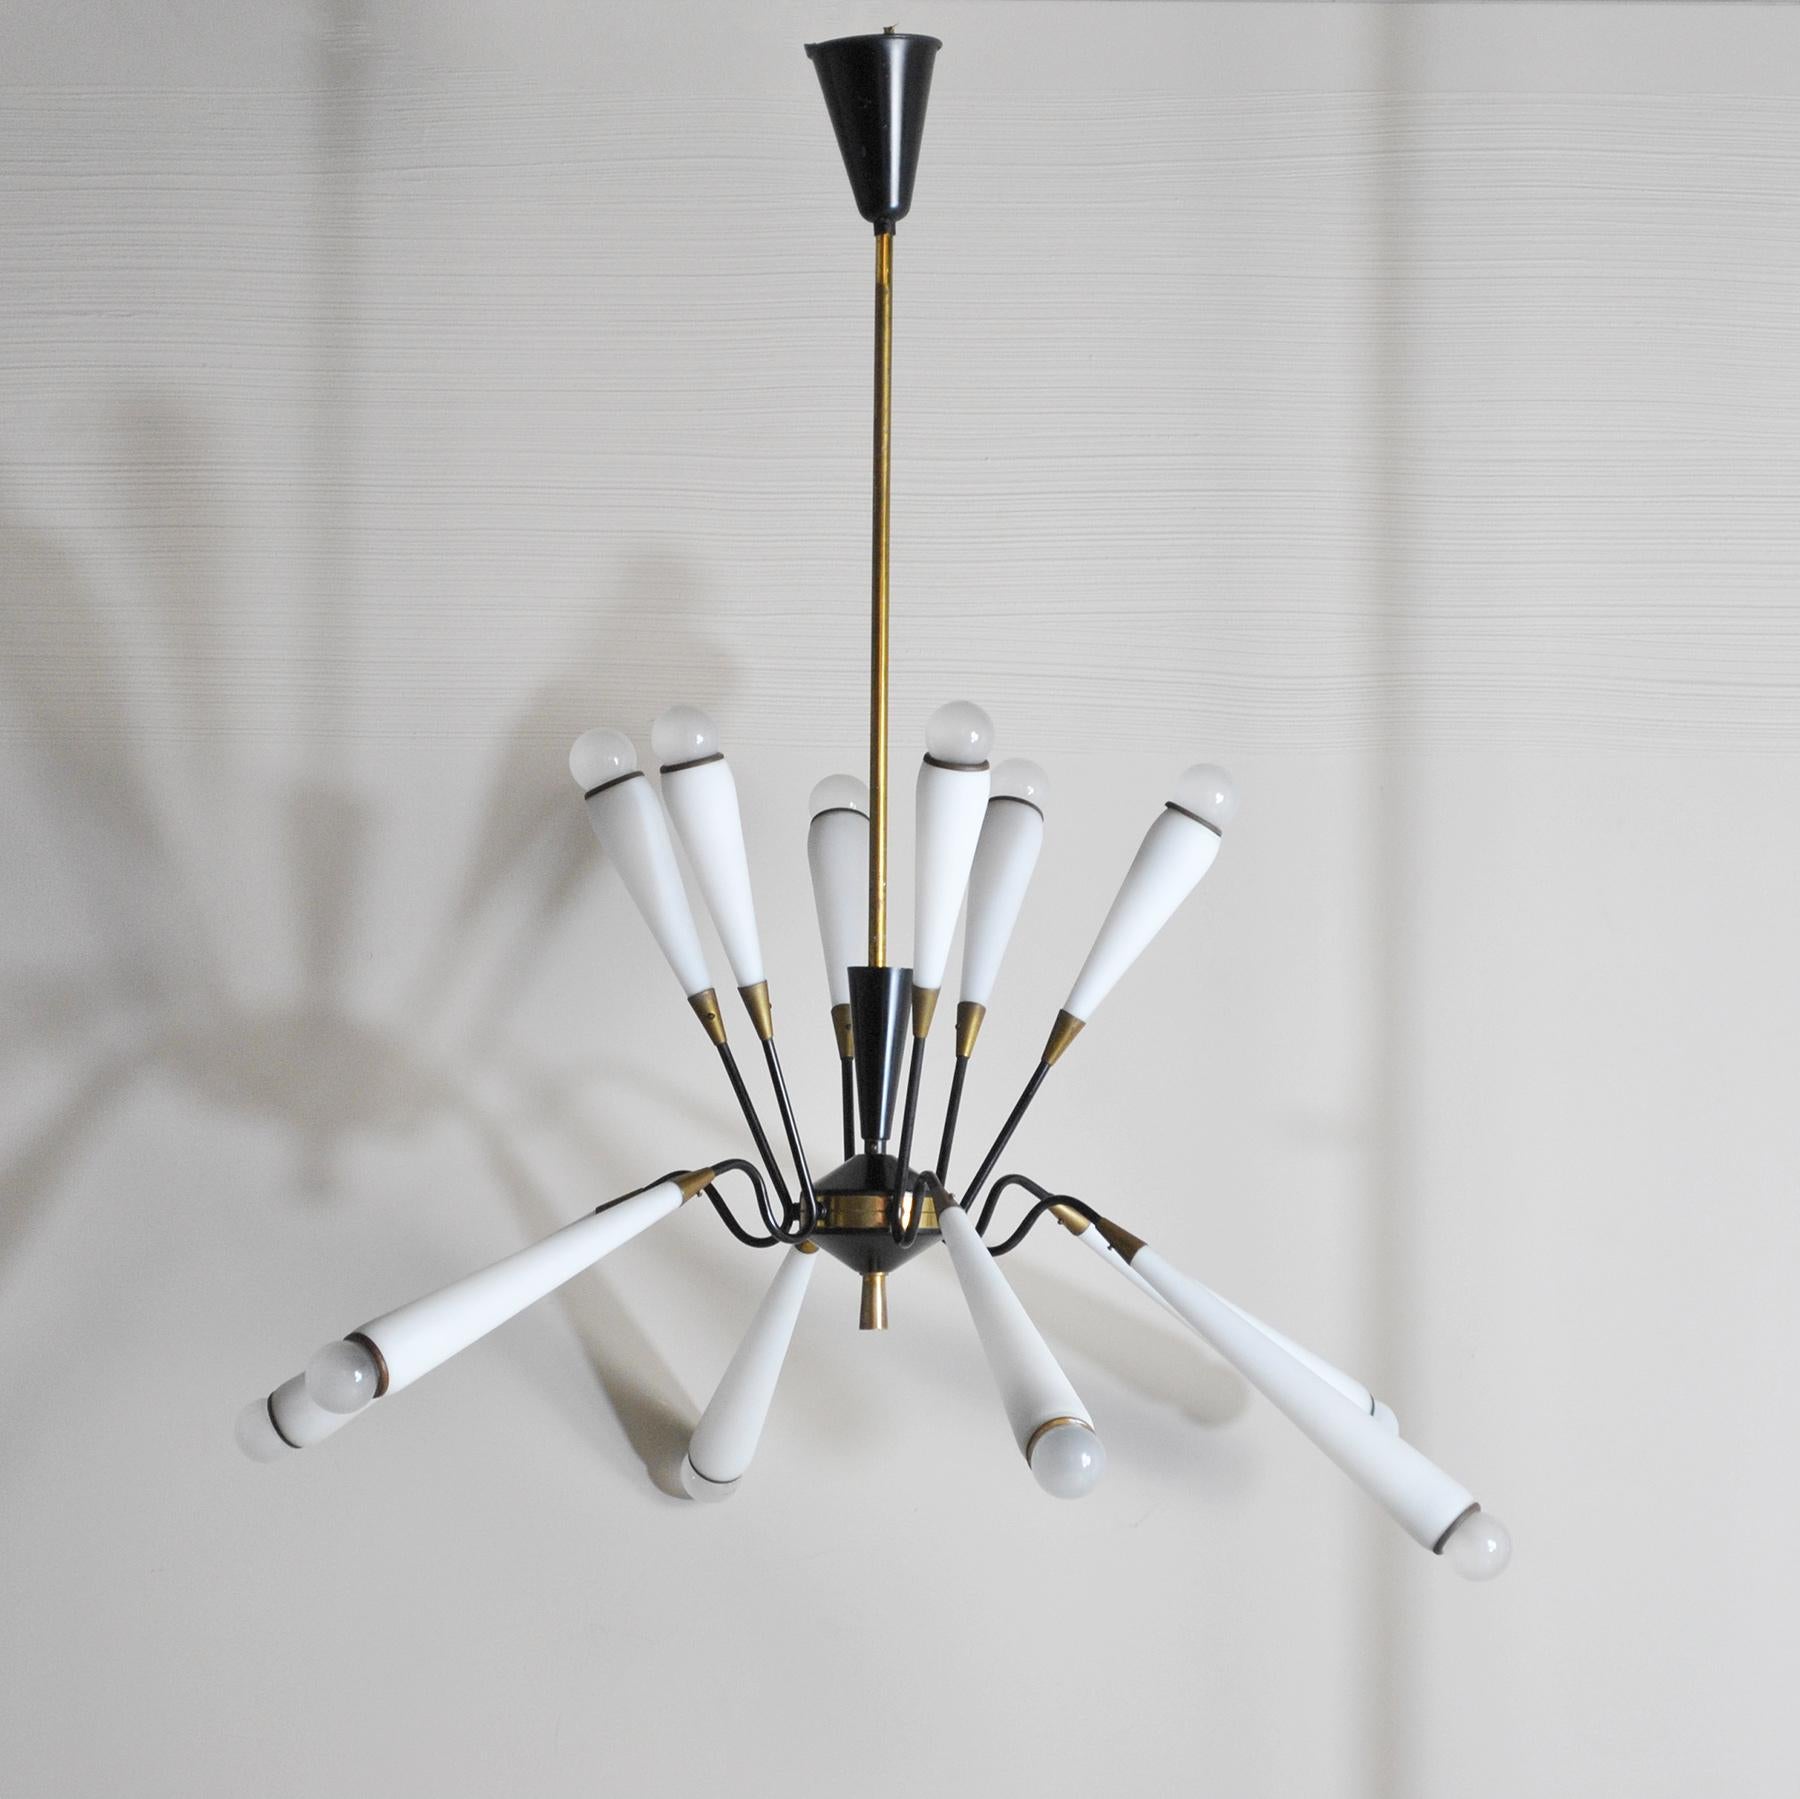 Suspension chandelier with 12 lights, opal cones, details in brass, in the style of Stilnovo, late 1950s.